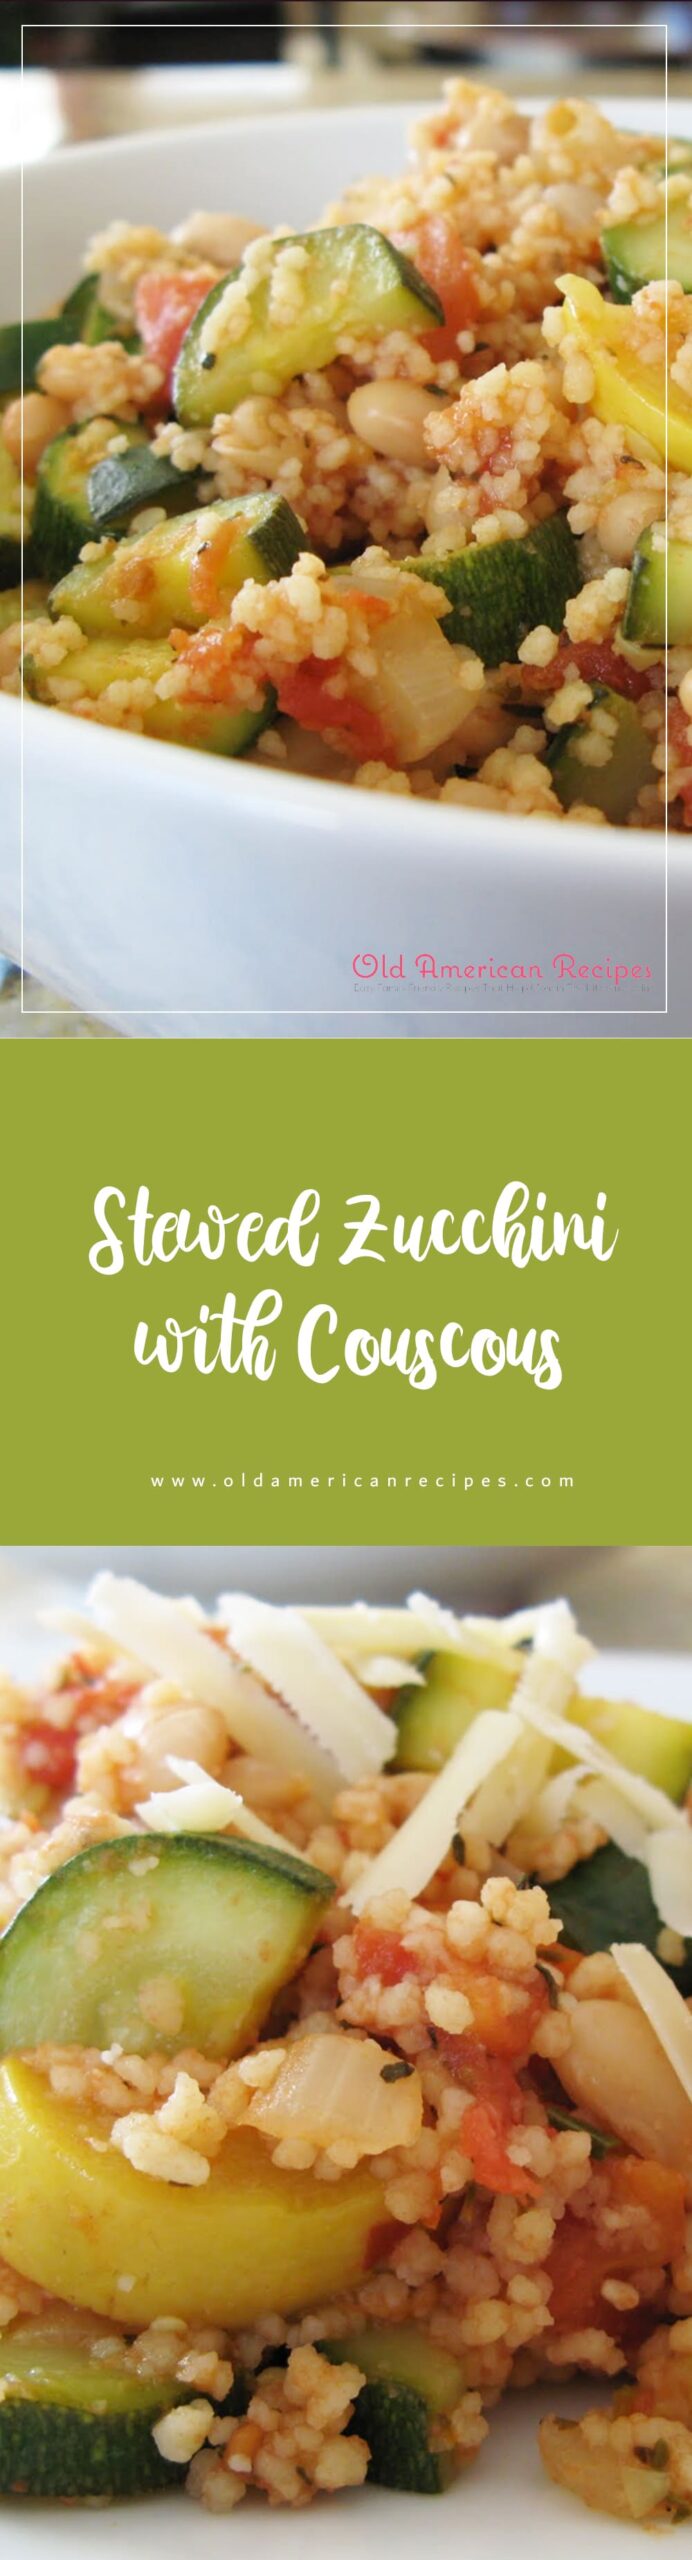 Stewed Zucchini with Couscous
